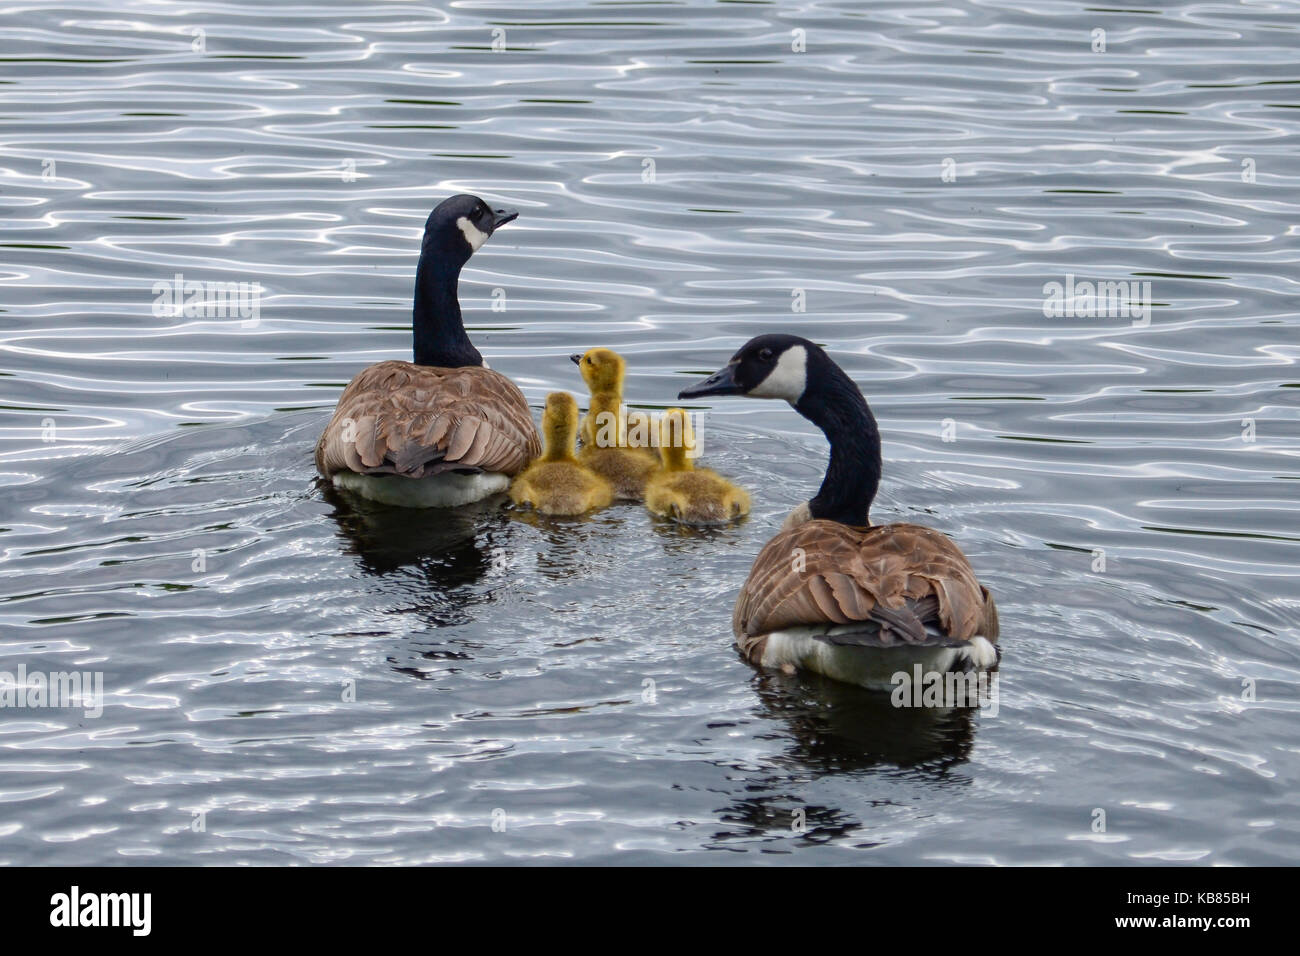 A pair of Canada geese swimming on an Adirondack pond with their goslings. Stock Photo